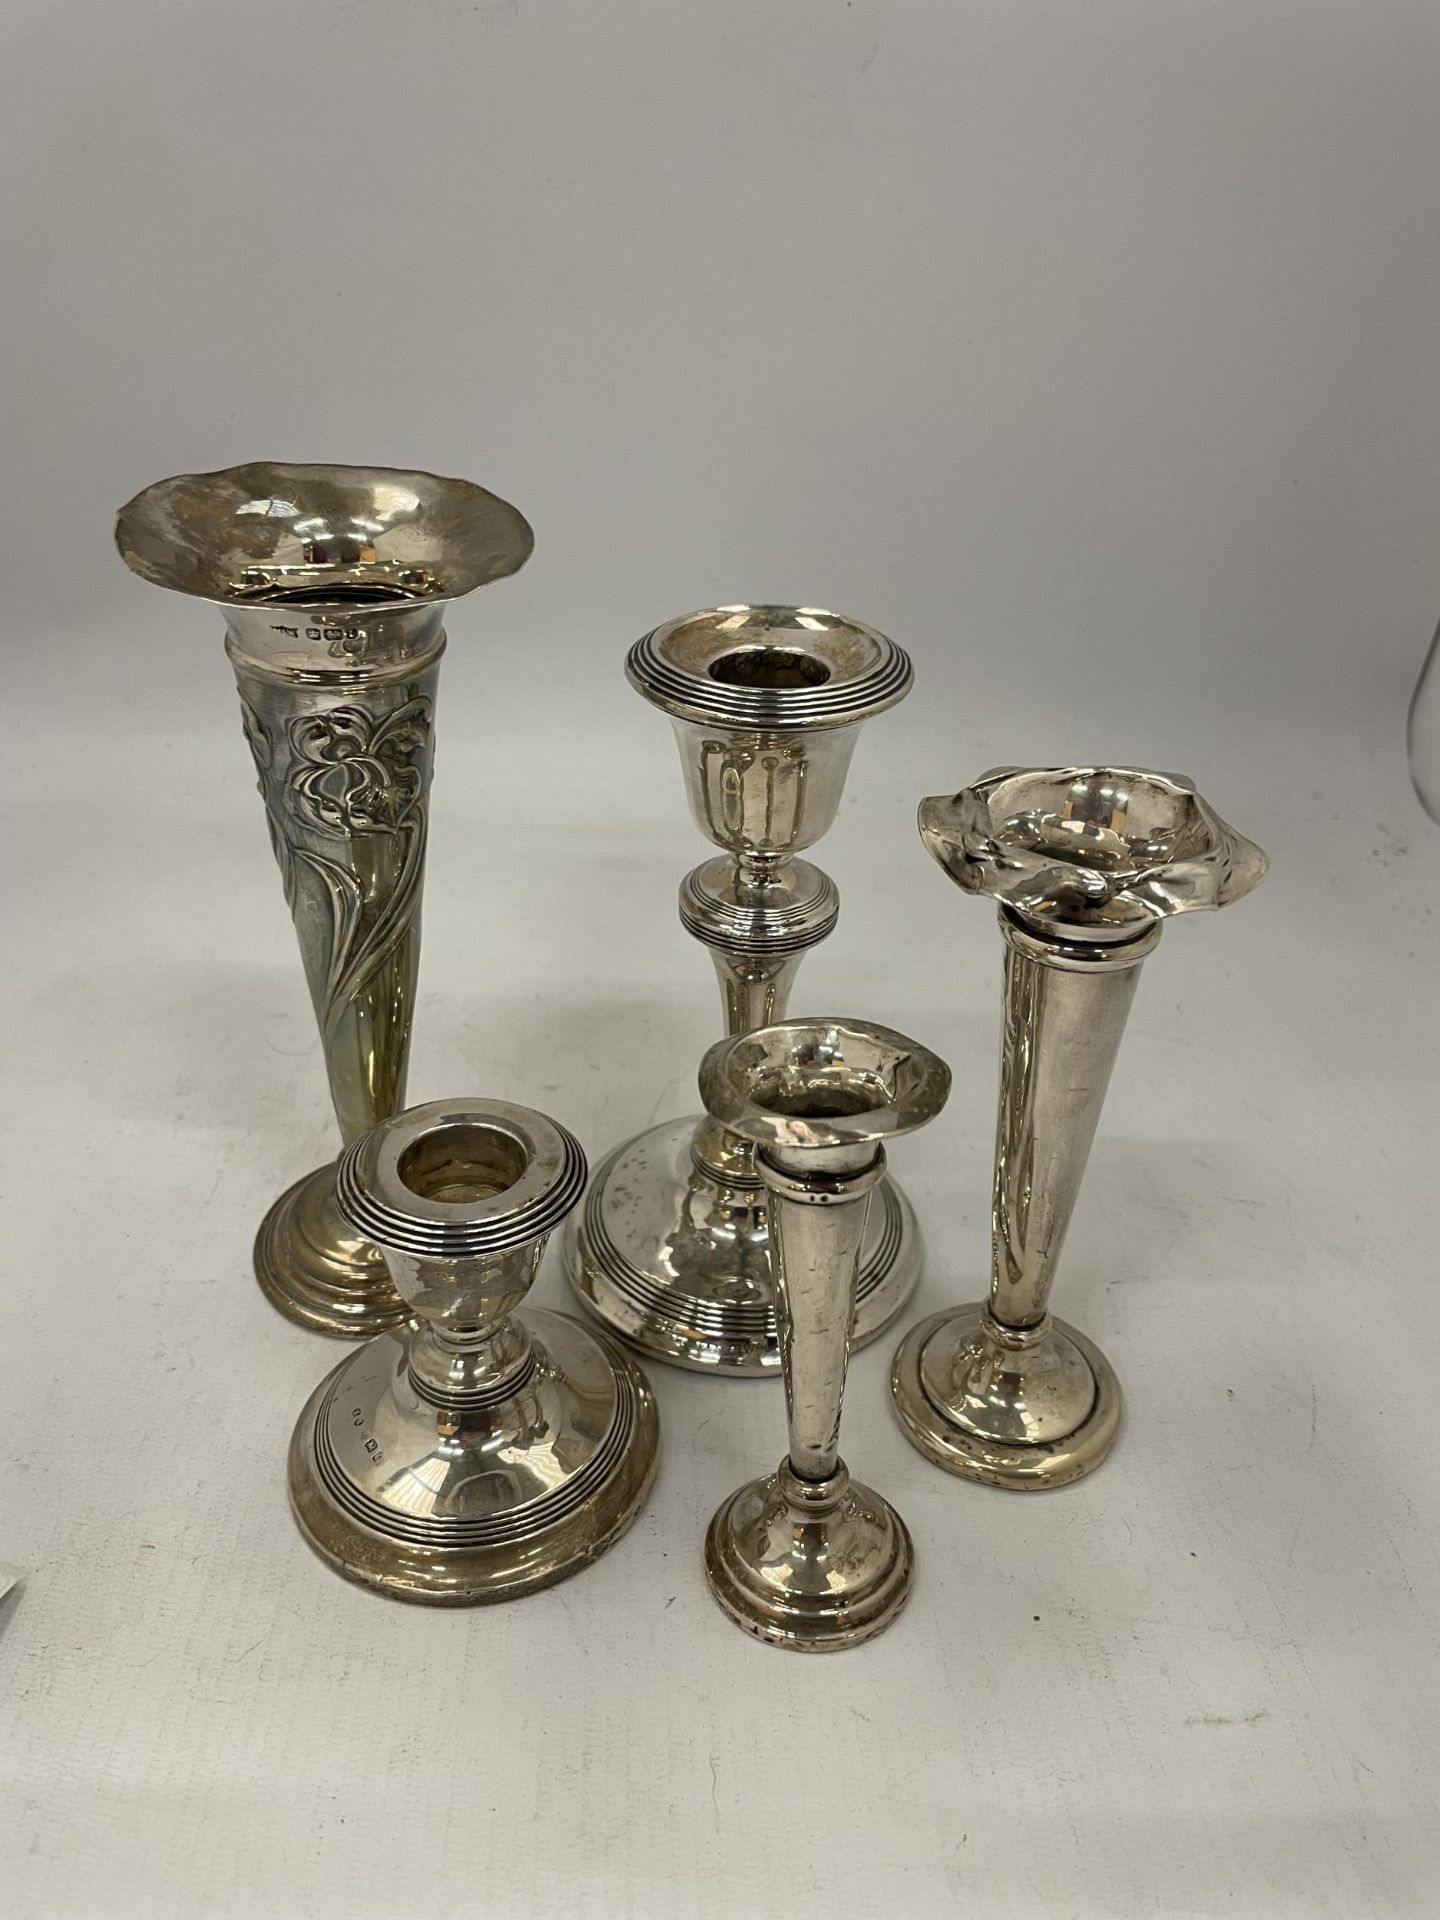 A MIXED LOT OF HALLMARKED SILVER ITEMS - ART NOUVEAU FLORAL DESIGN BUD VASE, FURTHER POSY VASES